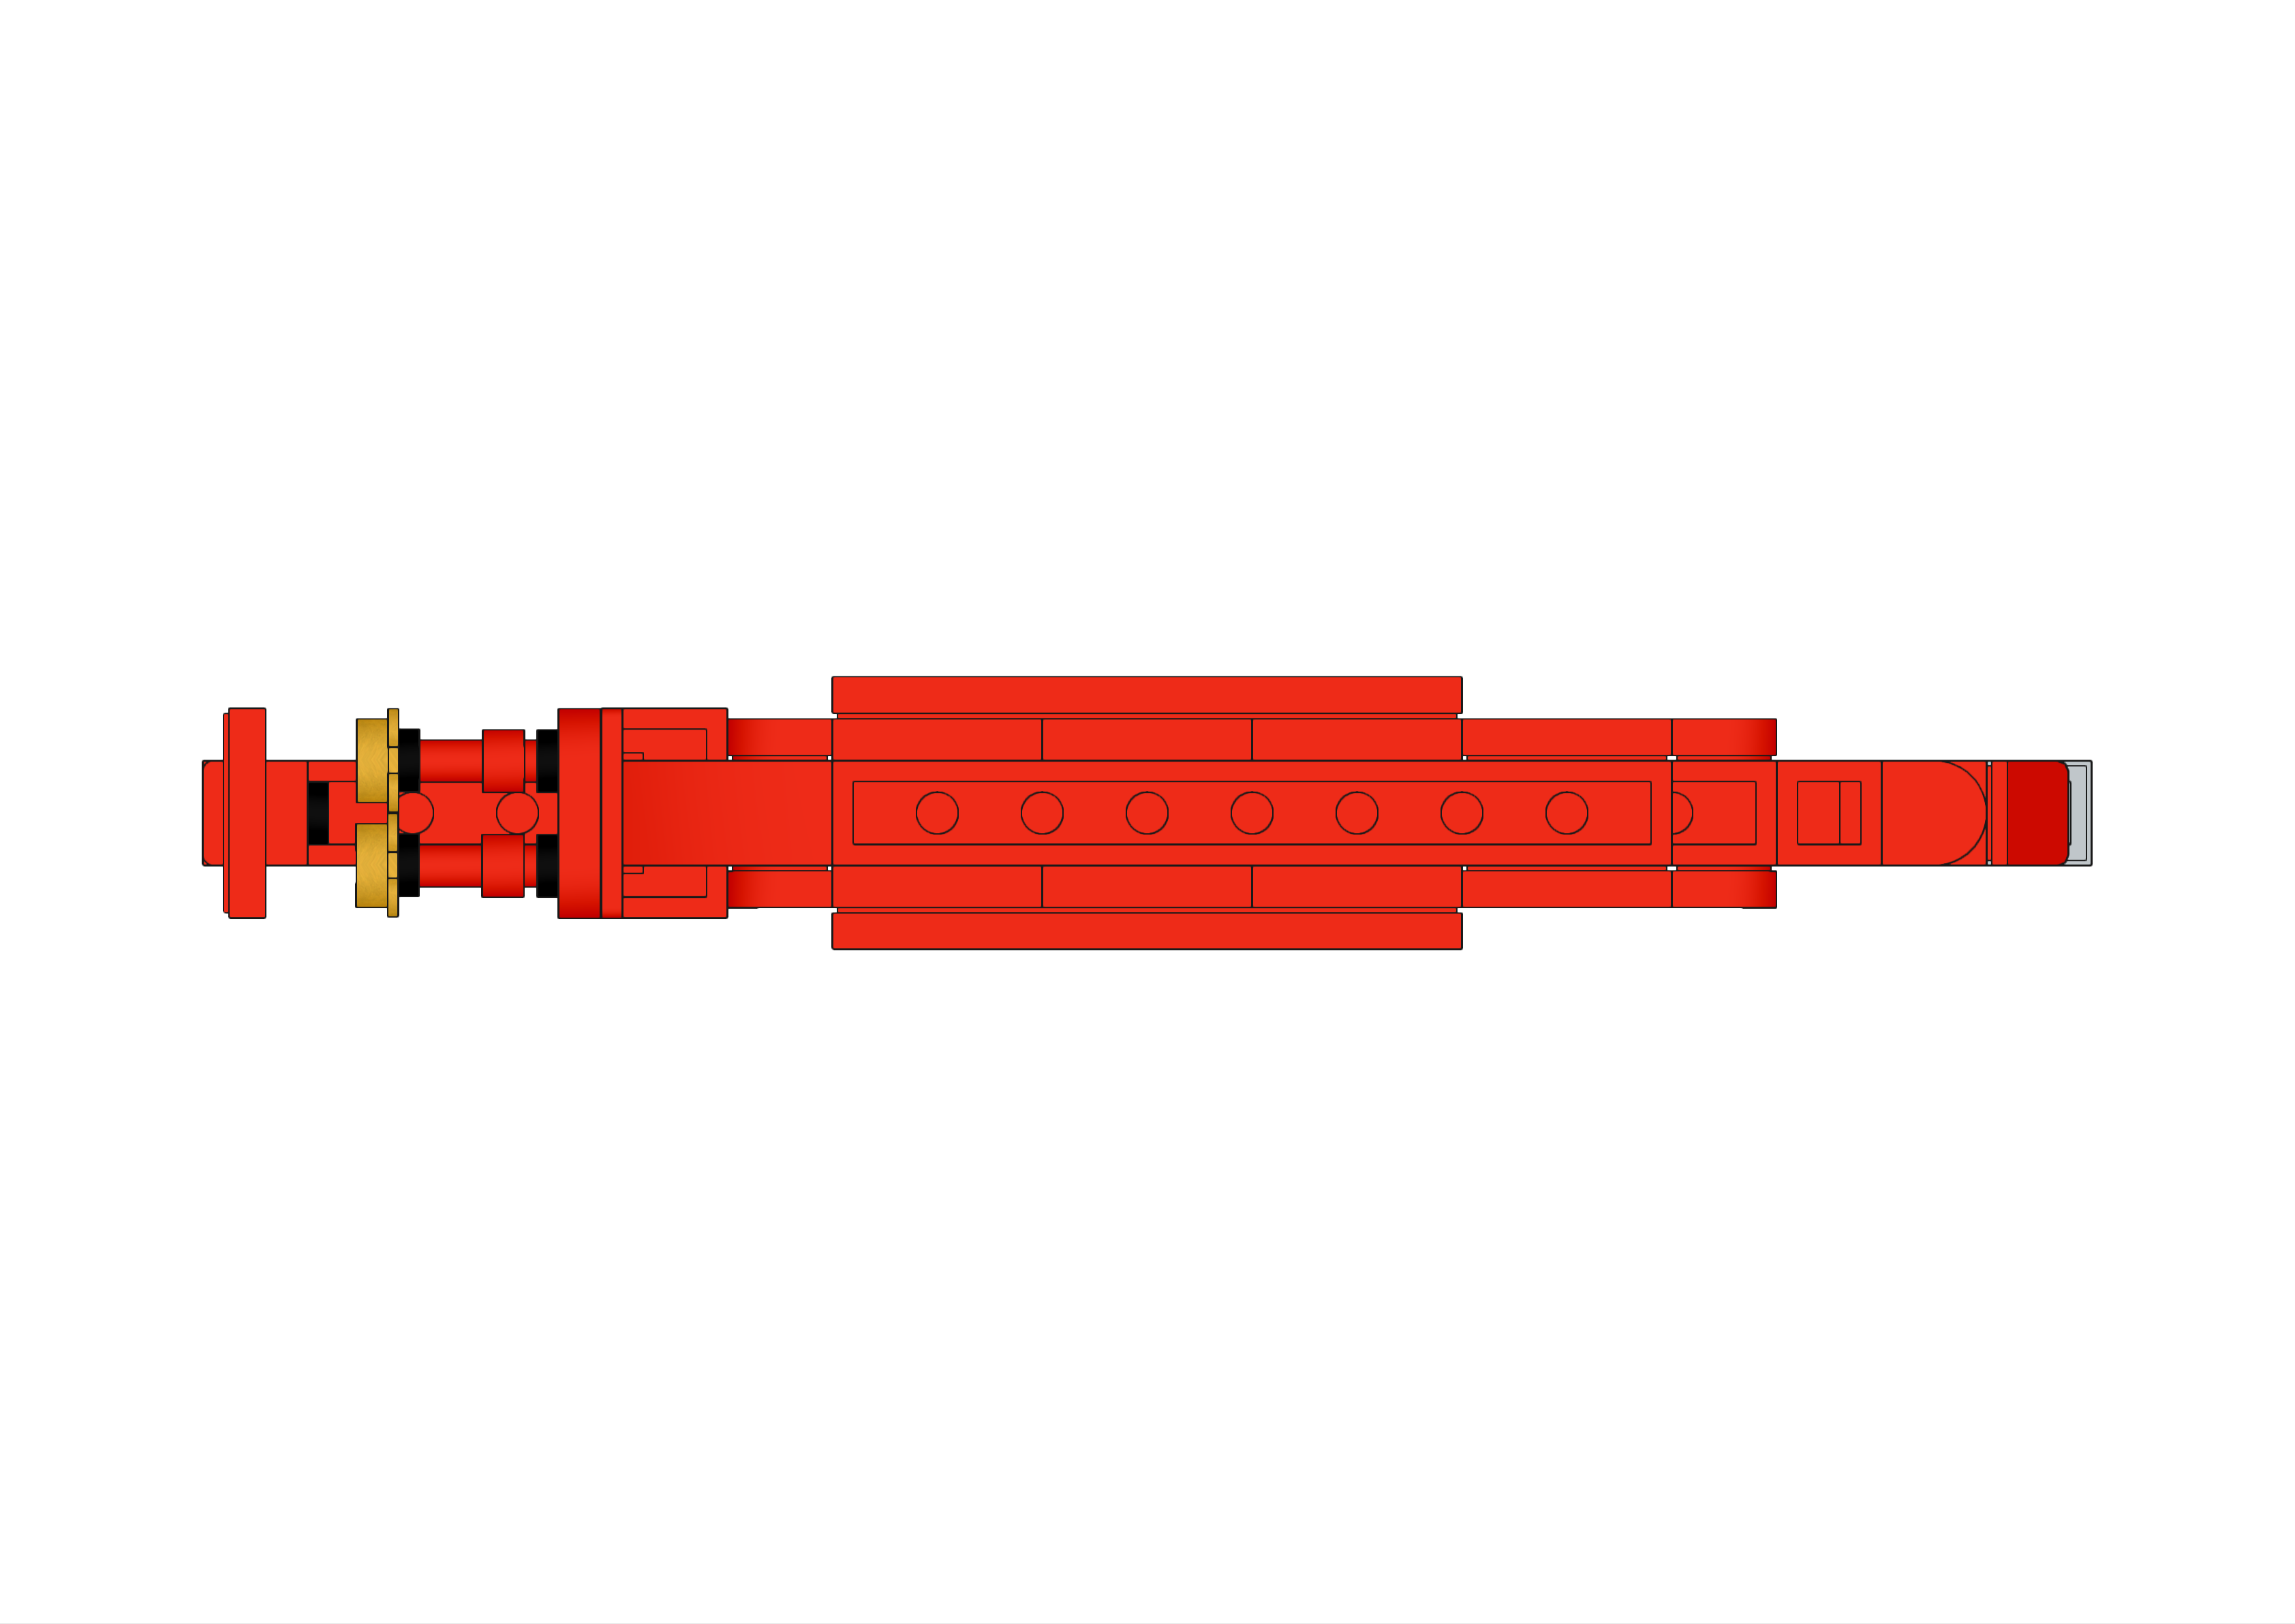 Bottom view image of the LEGO Archimede Class Submarine MOC.